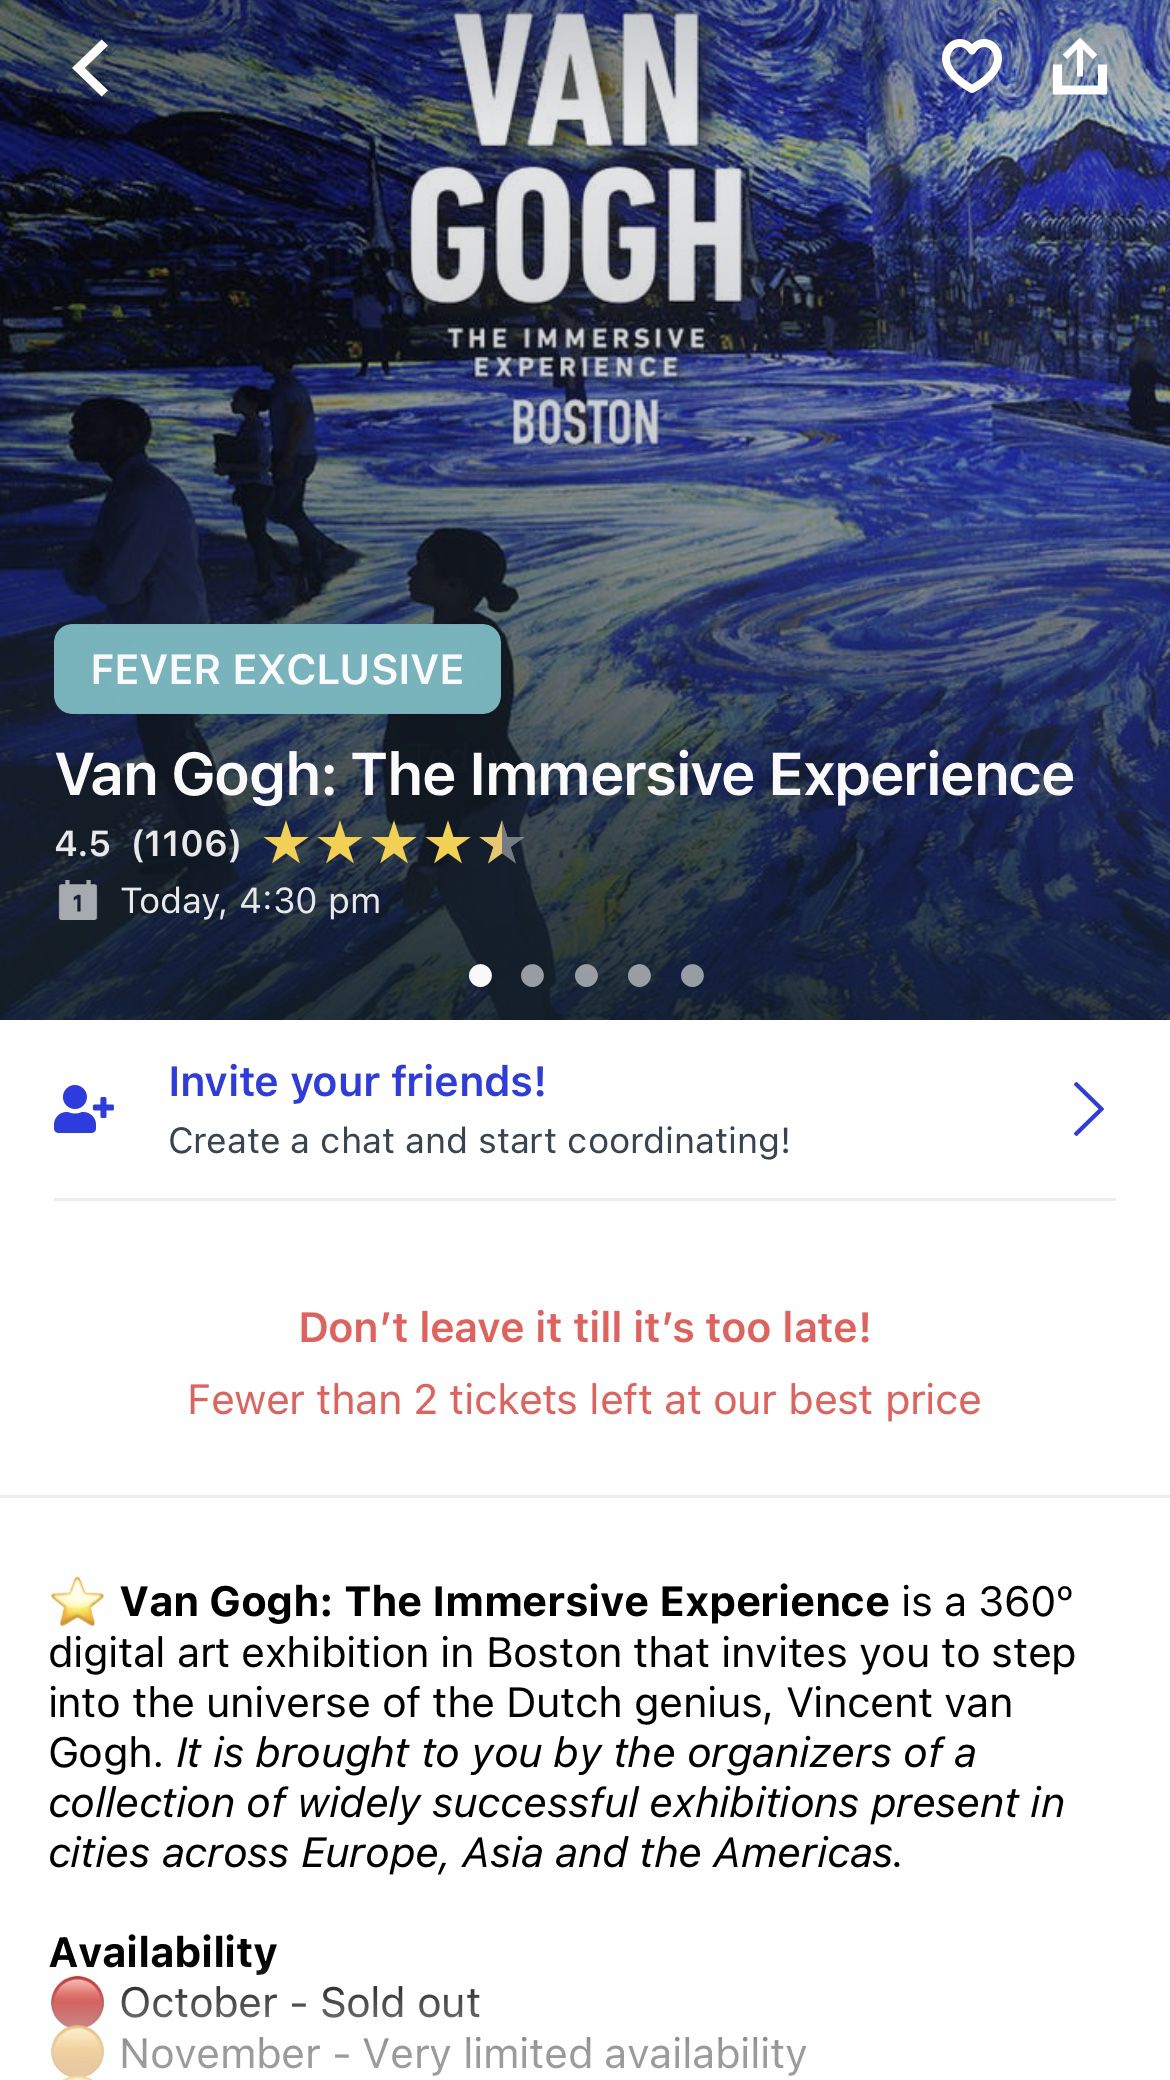 Van Gogh: The Immersive Experience - 2 VIP Adult Tickets for 10/24 6:30pm 